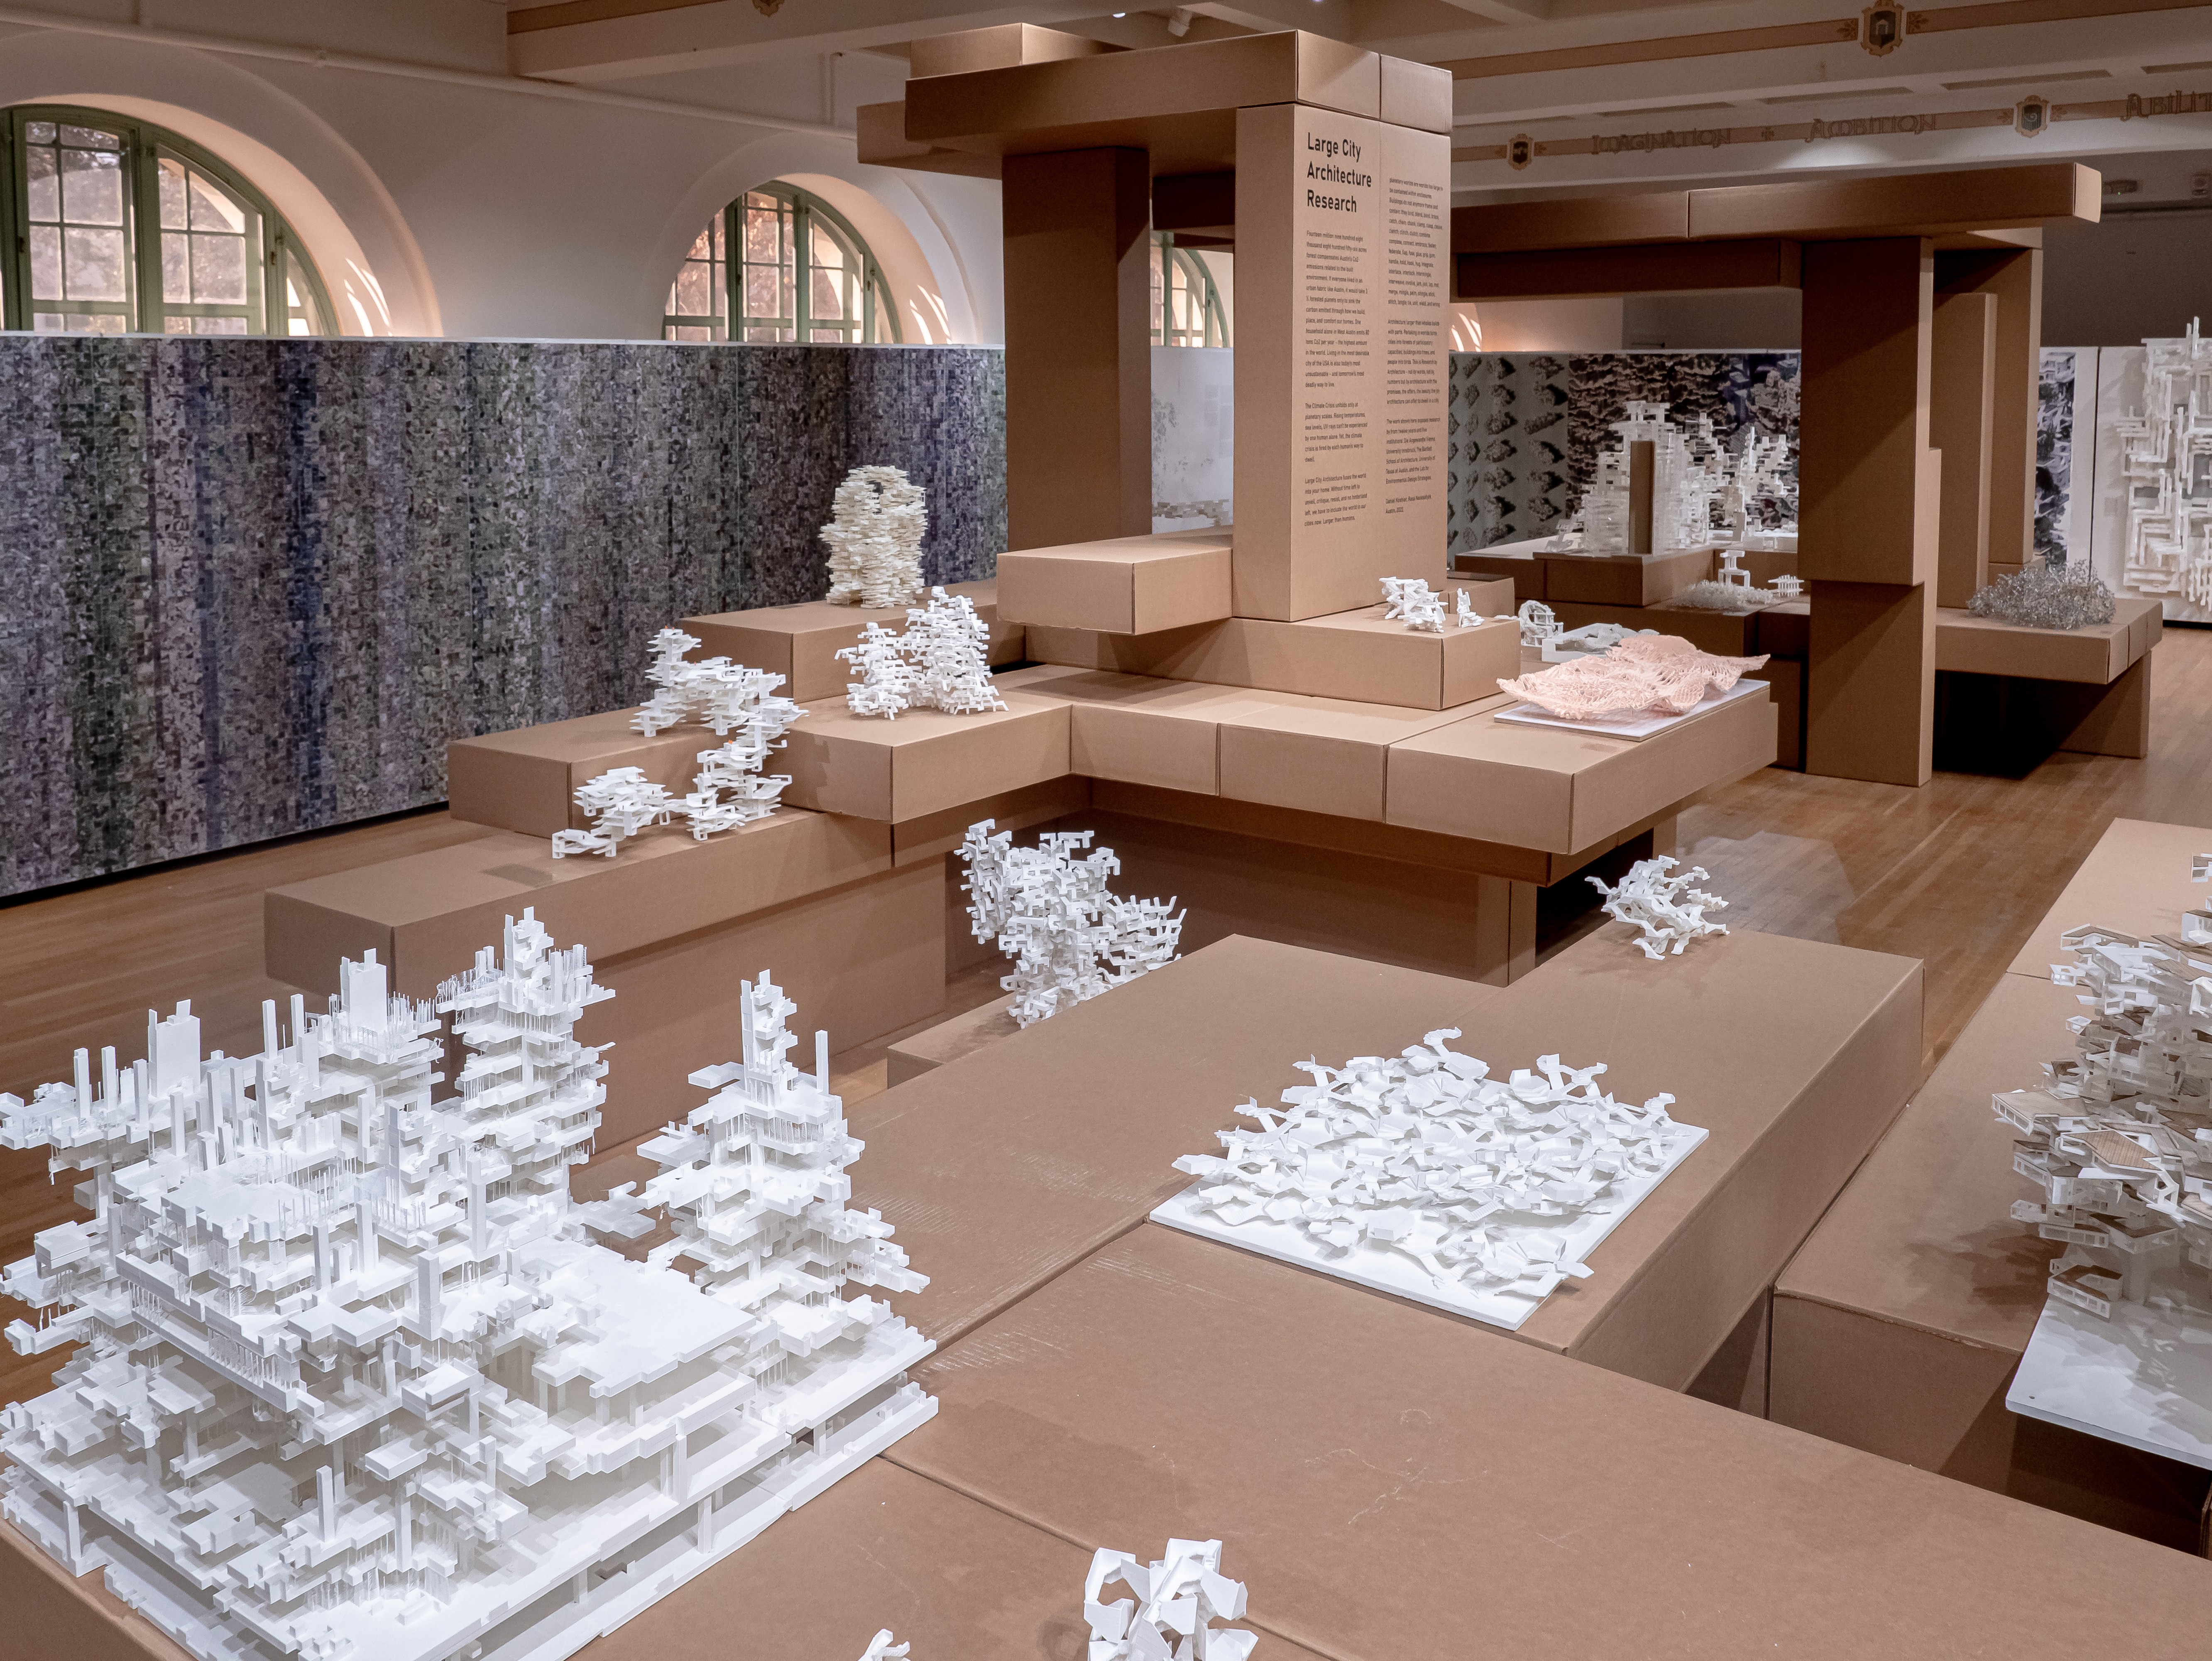 Large City Architecture Research Exhibition